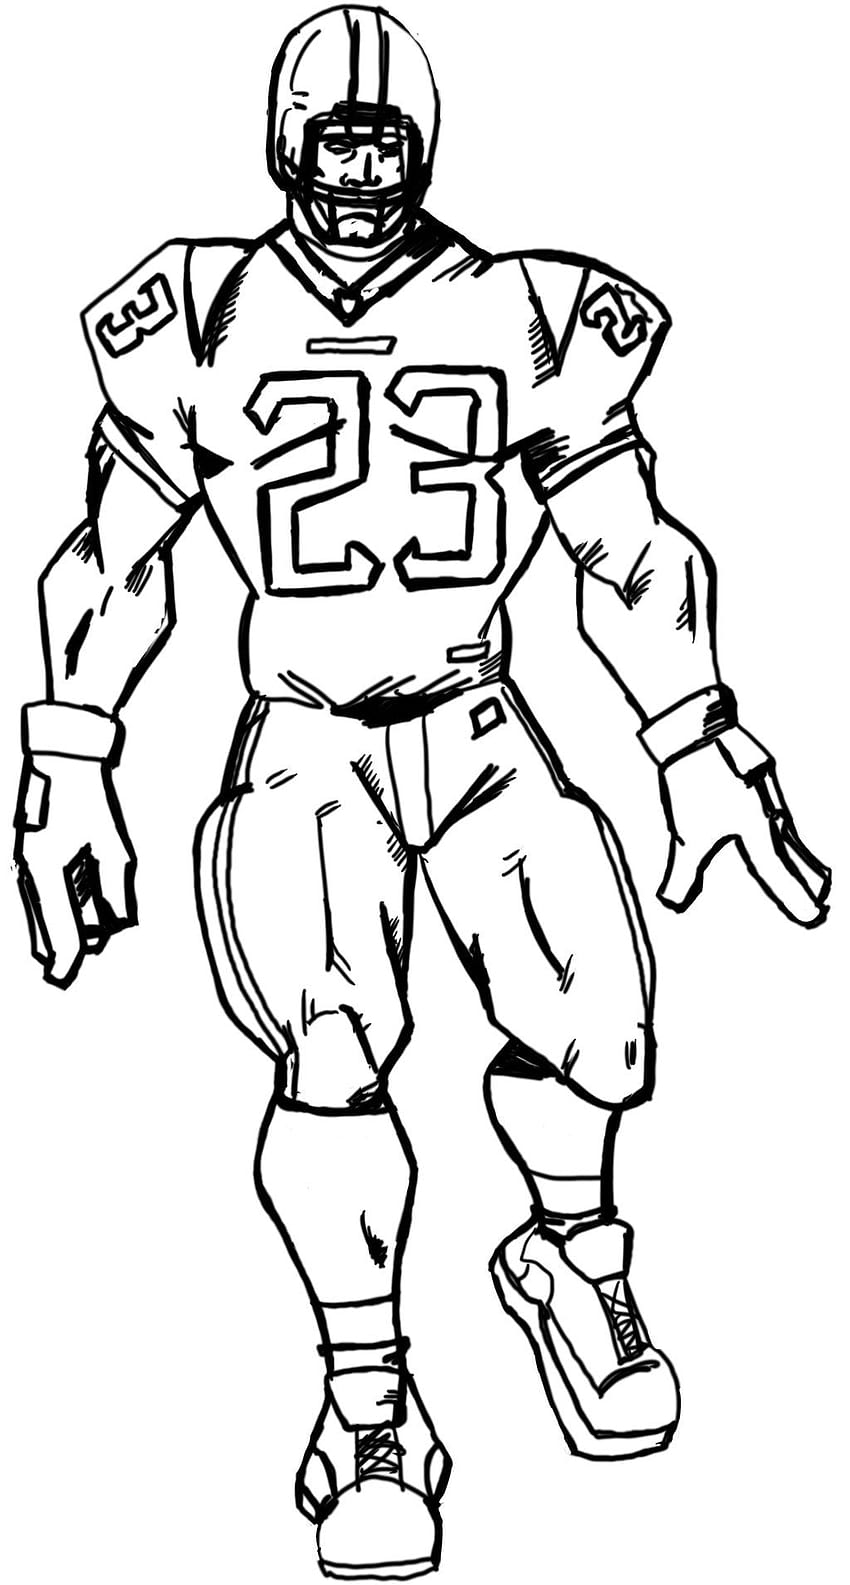 How To Draw A Football Player, Step by Step, Drawing Guide, by Dawn -  DragoArt